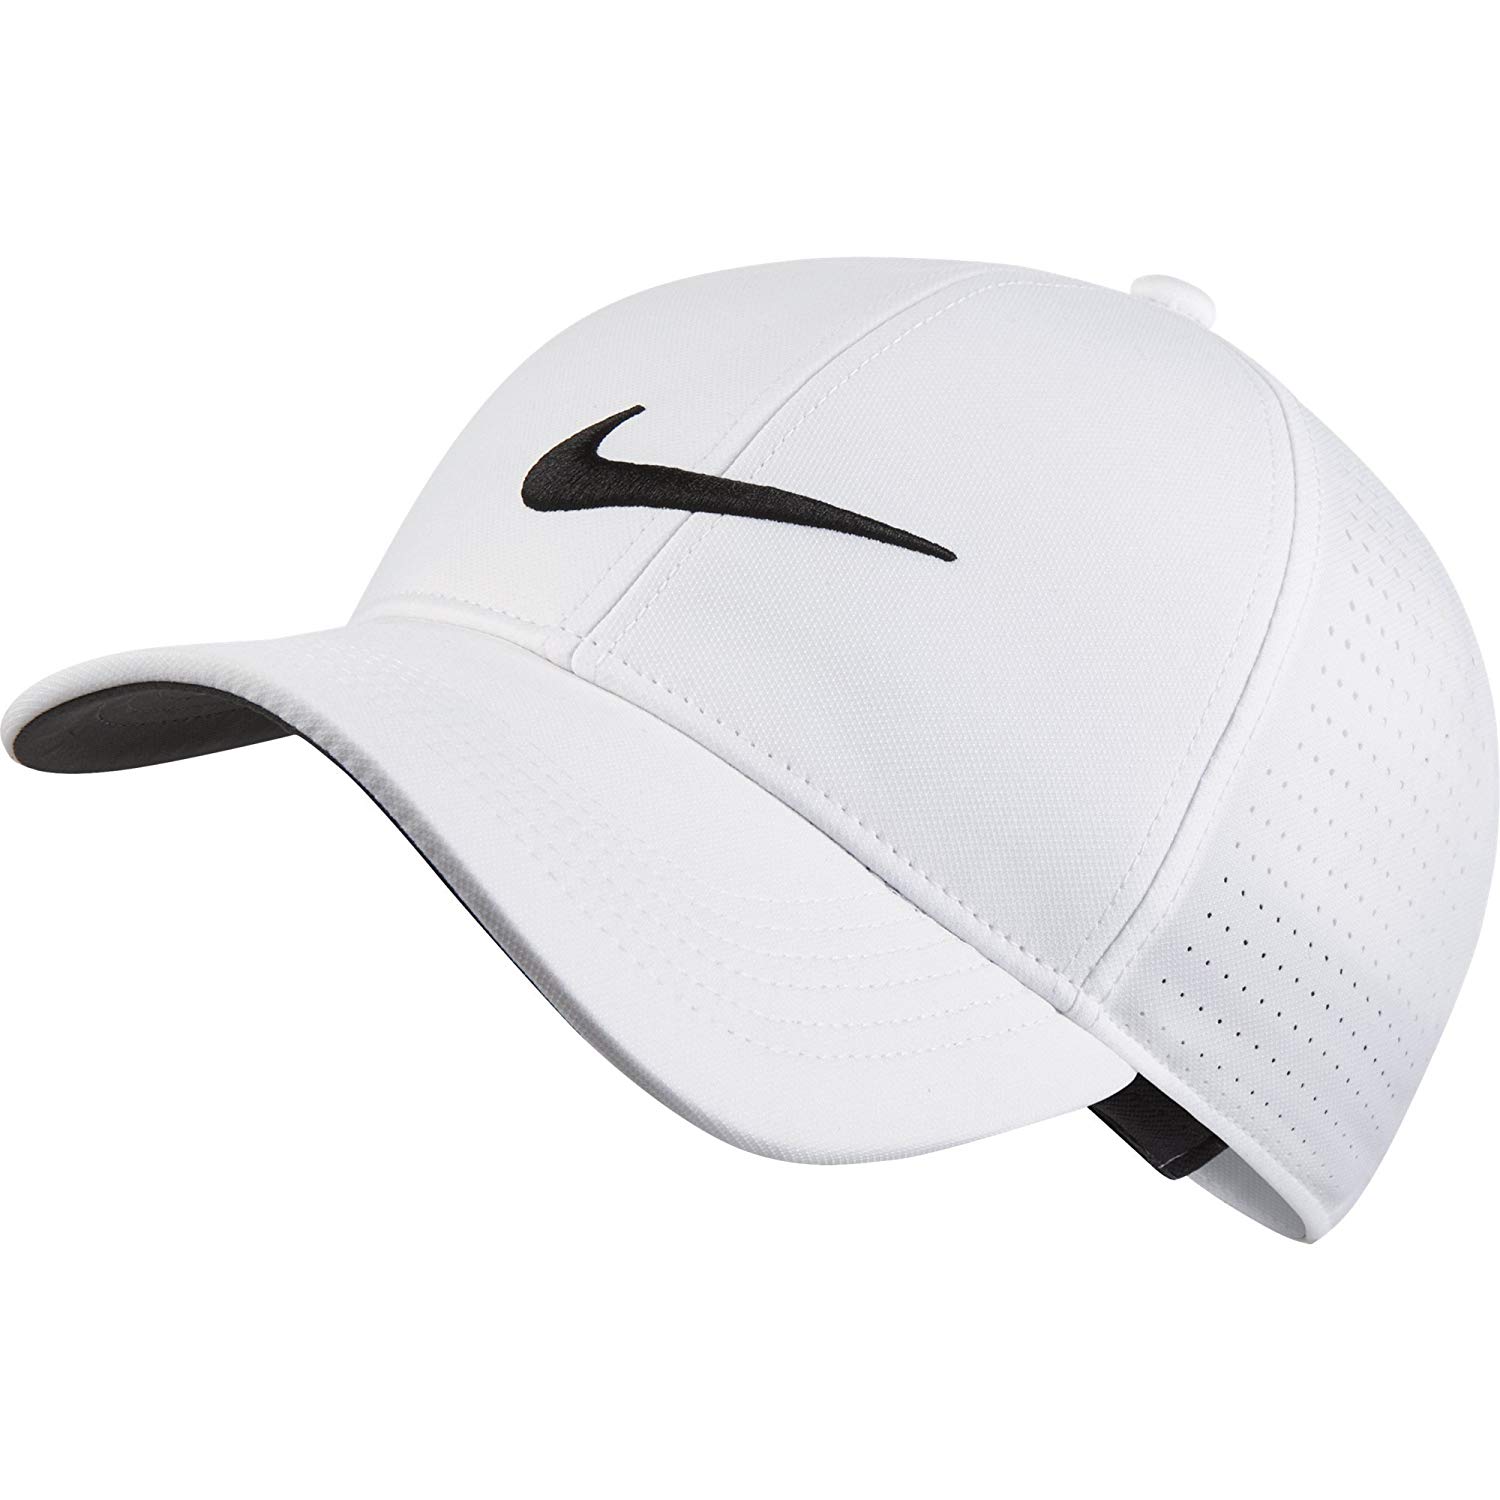 NIKE AeroBill Legacy 91 Perforated Golf Cap was $28, NOW $11.09 ...